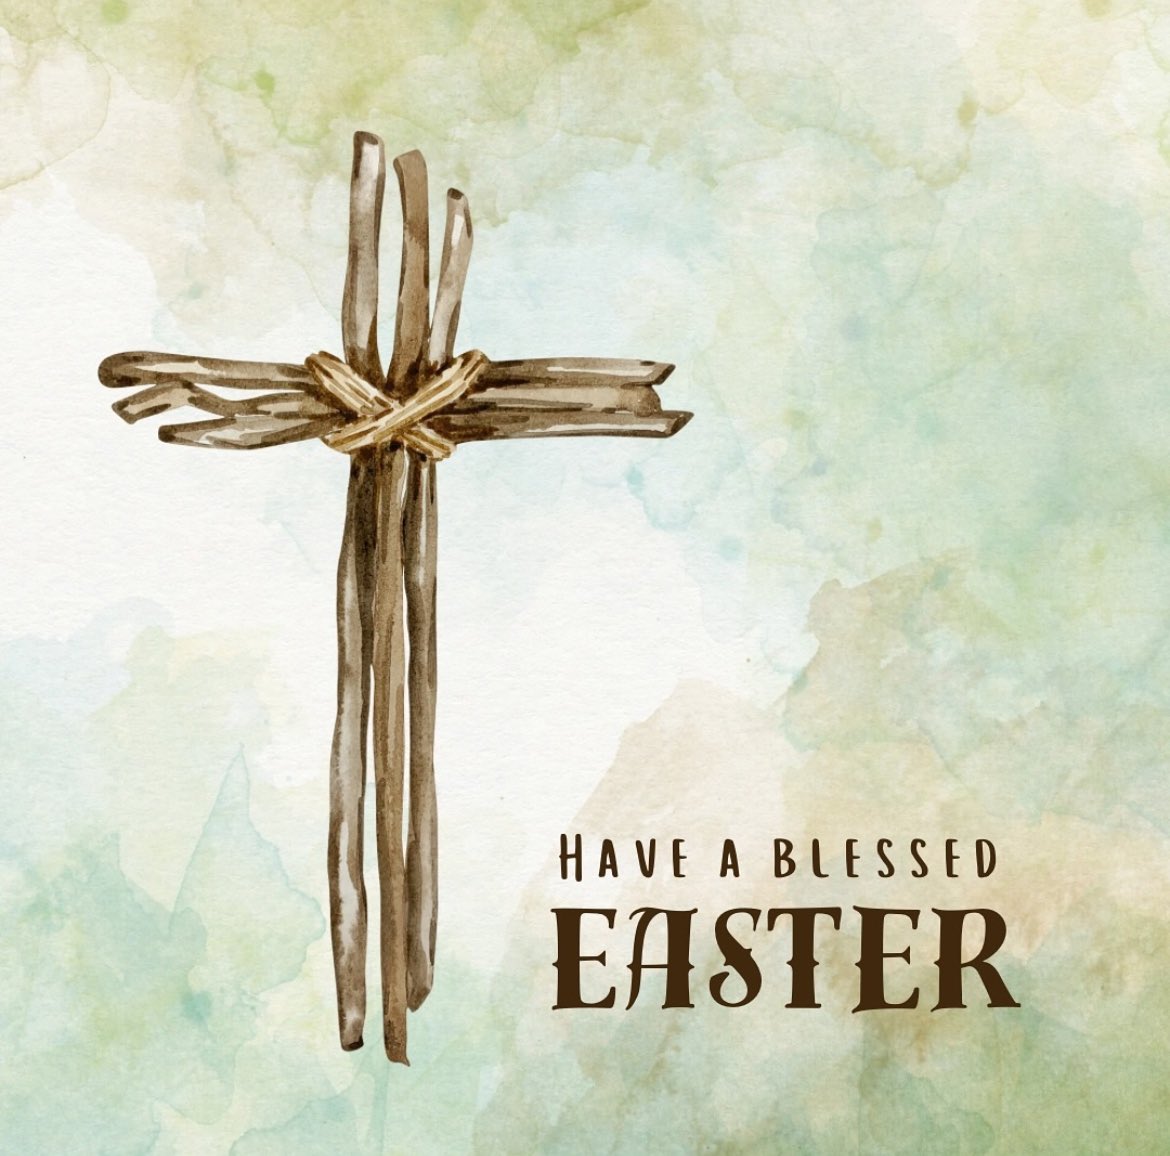 Saint Leo Baseball would like to wish you and your family a Blessed Easter !